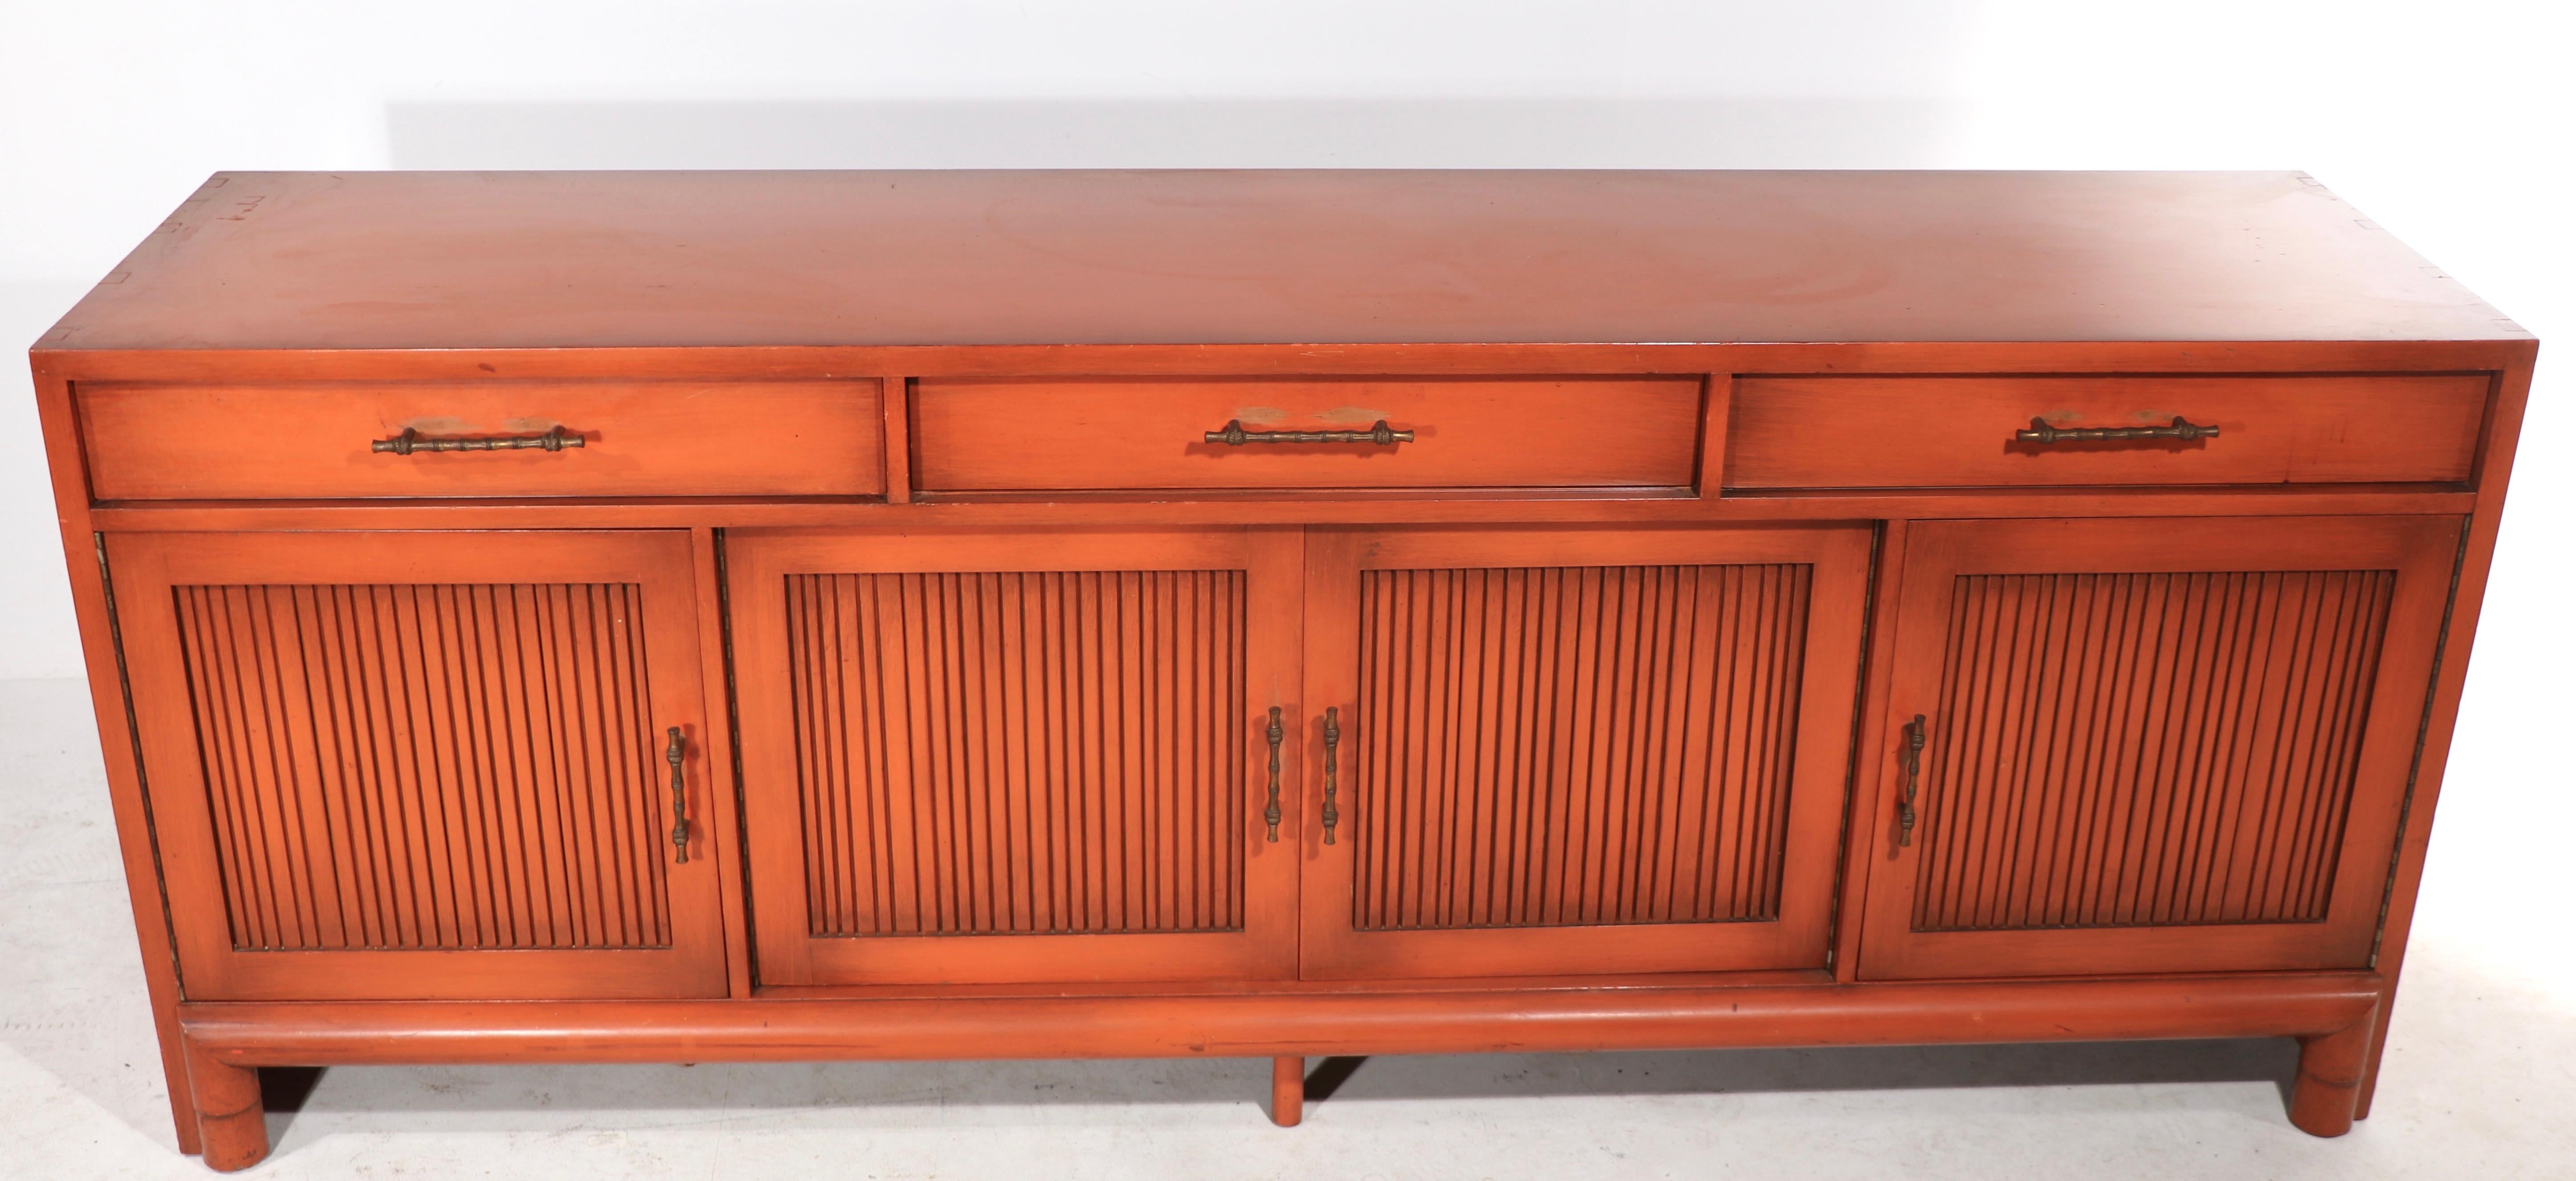 Asia Modern Mandarin Lacquer Sideboard in the Chinese Style by Willett For Sale 1